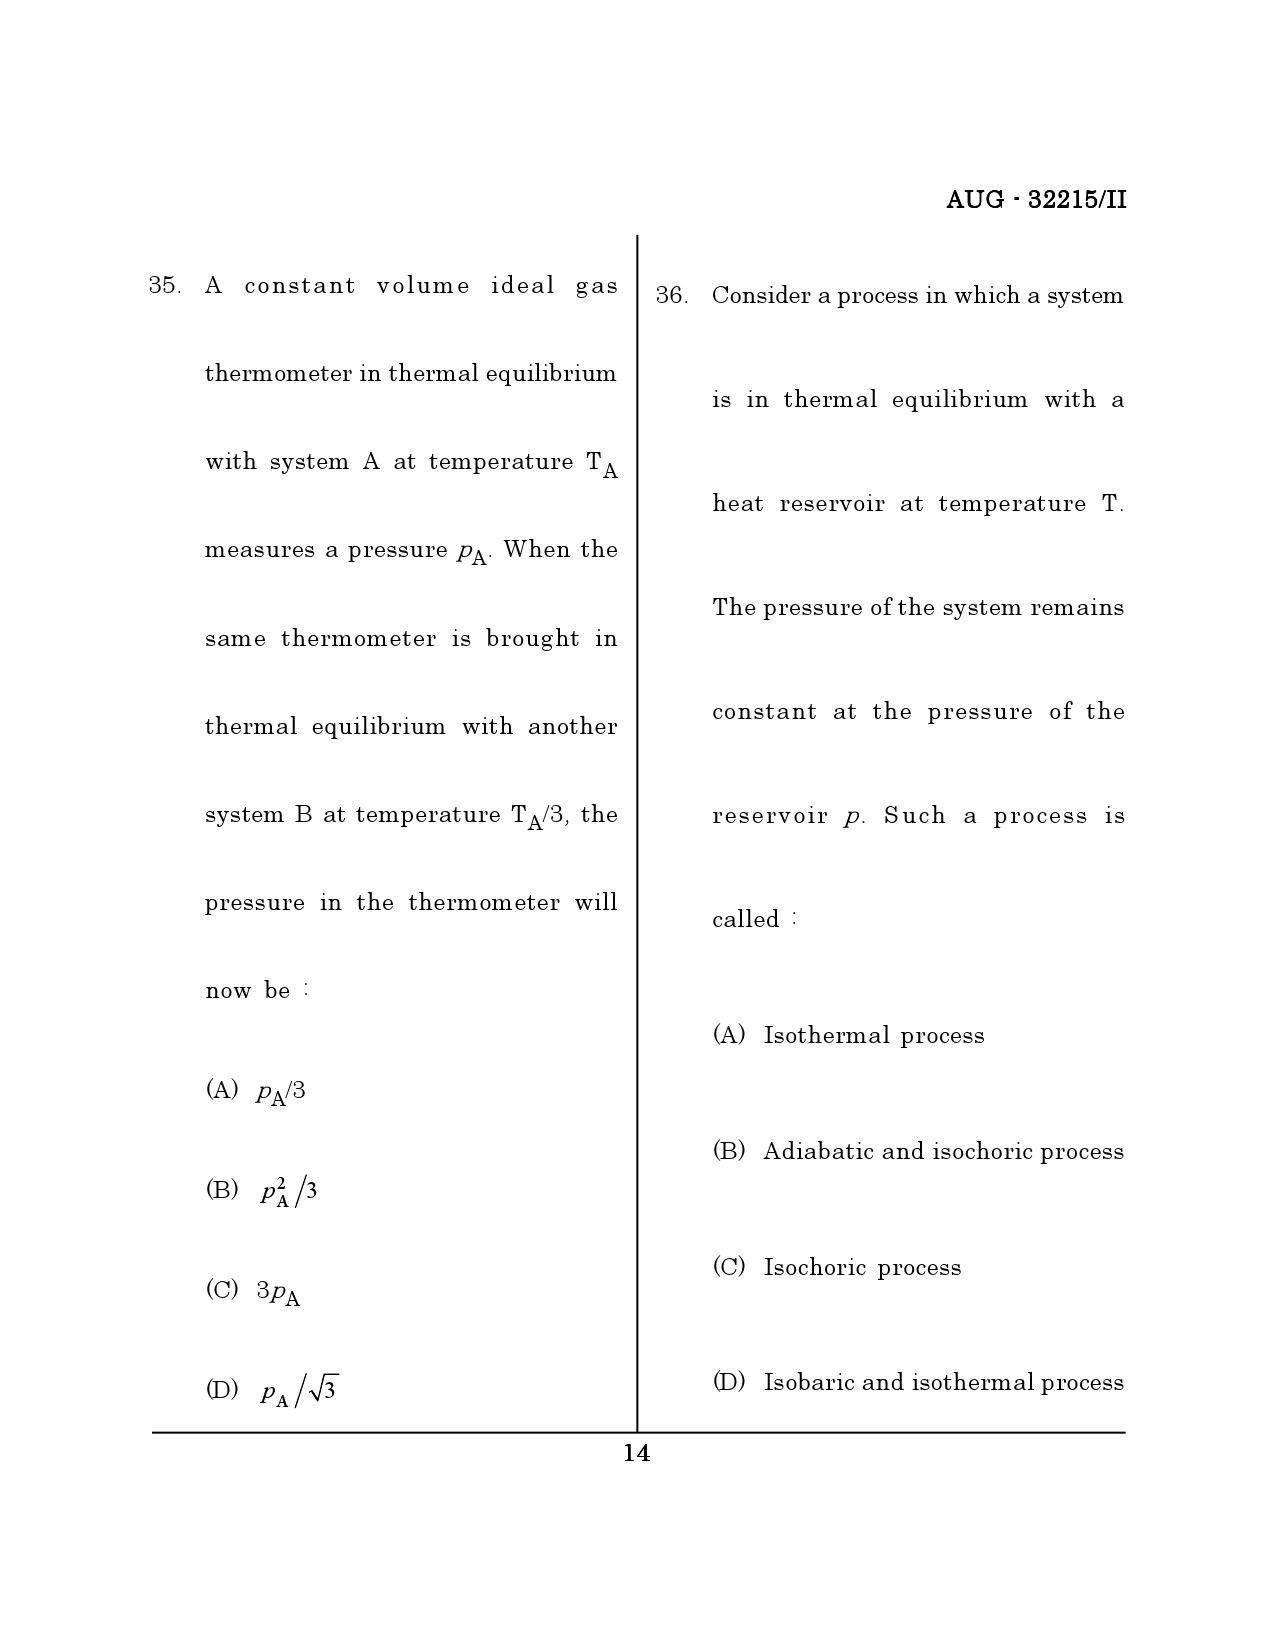 Maharashtra SET Physical Science Question Paper II August 2015 13